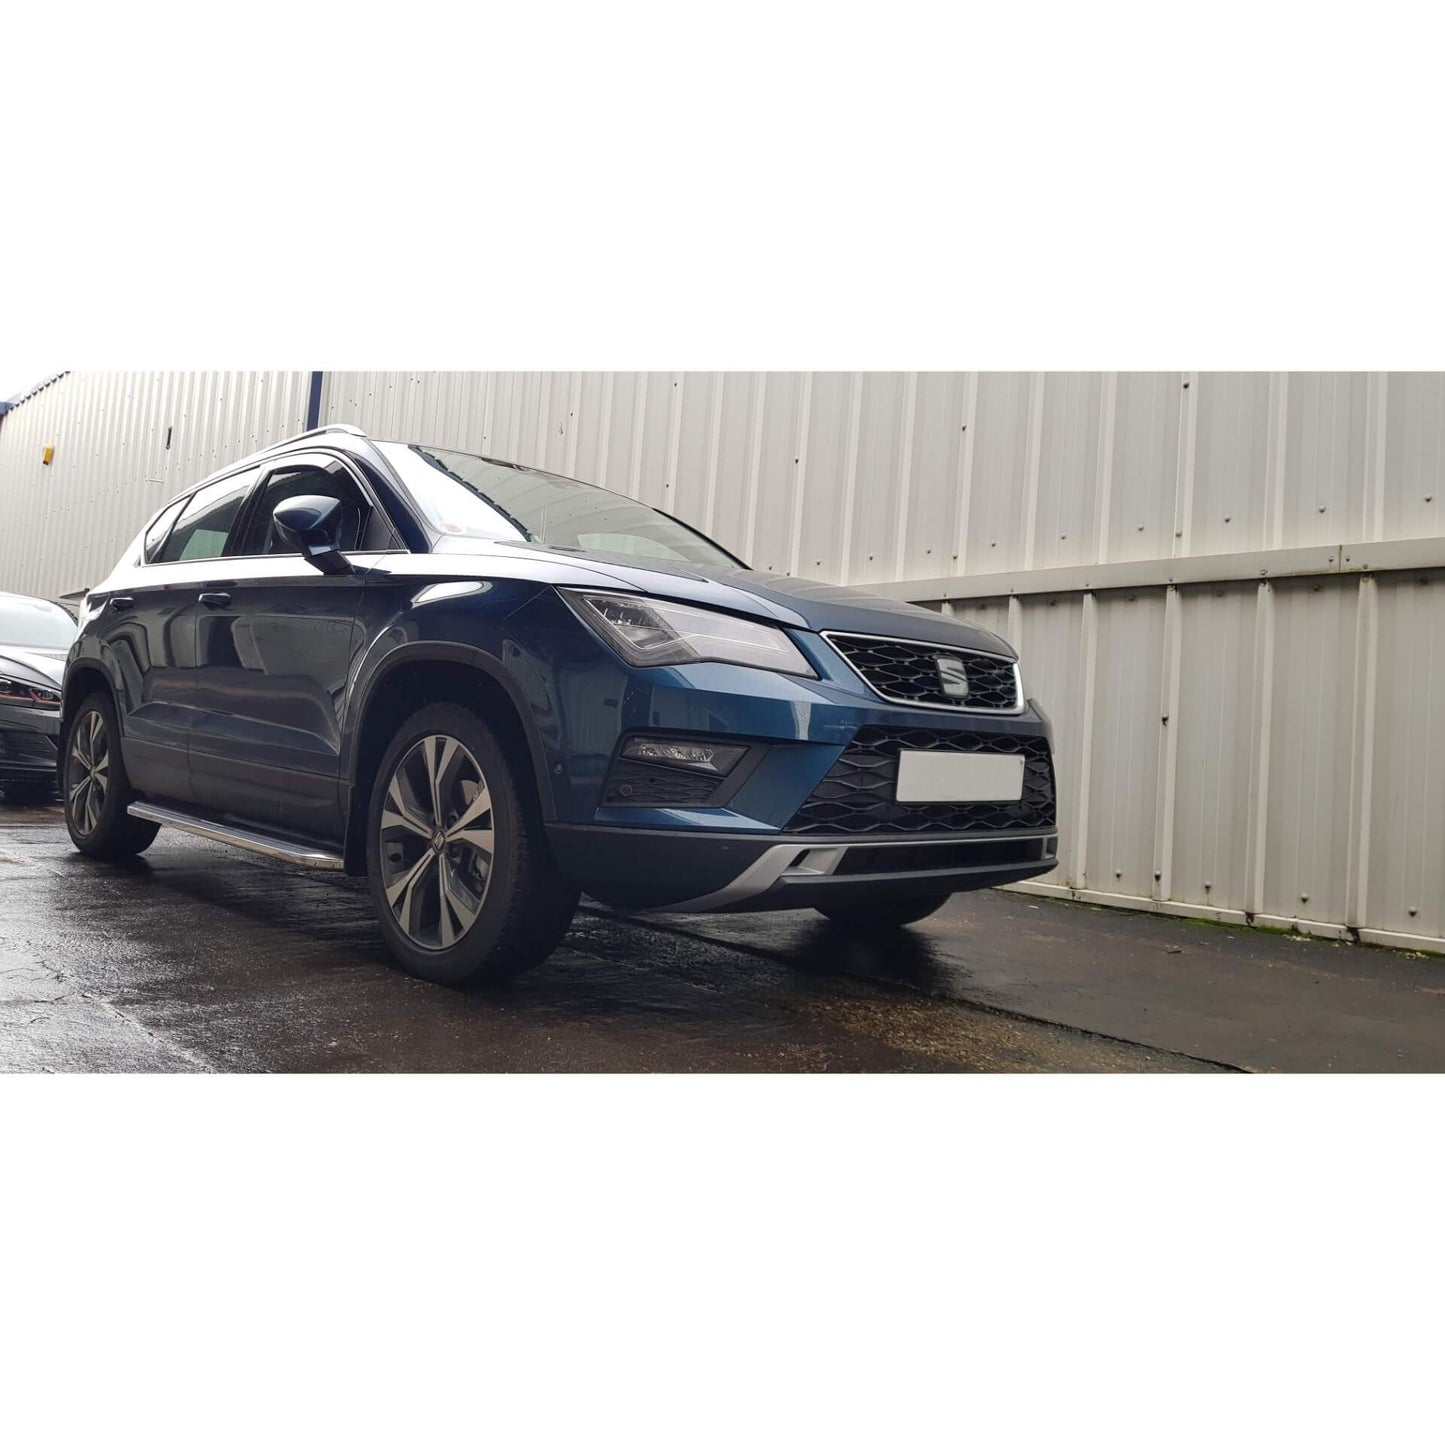 Raptor Side Steps Running Boards for Seat Ateca 2019+ -  - sold by Direct4x4